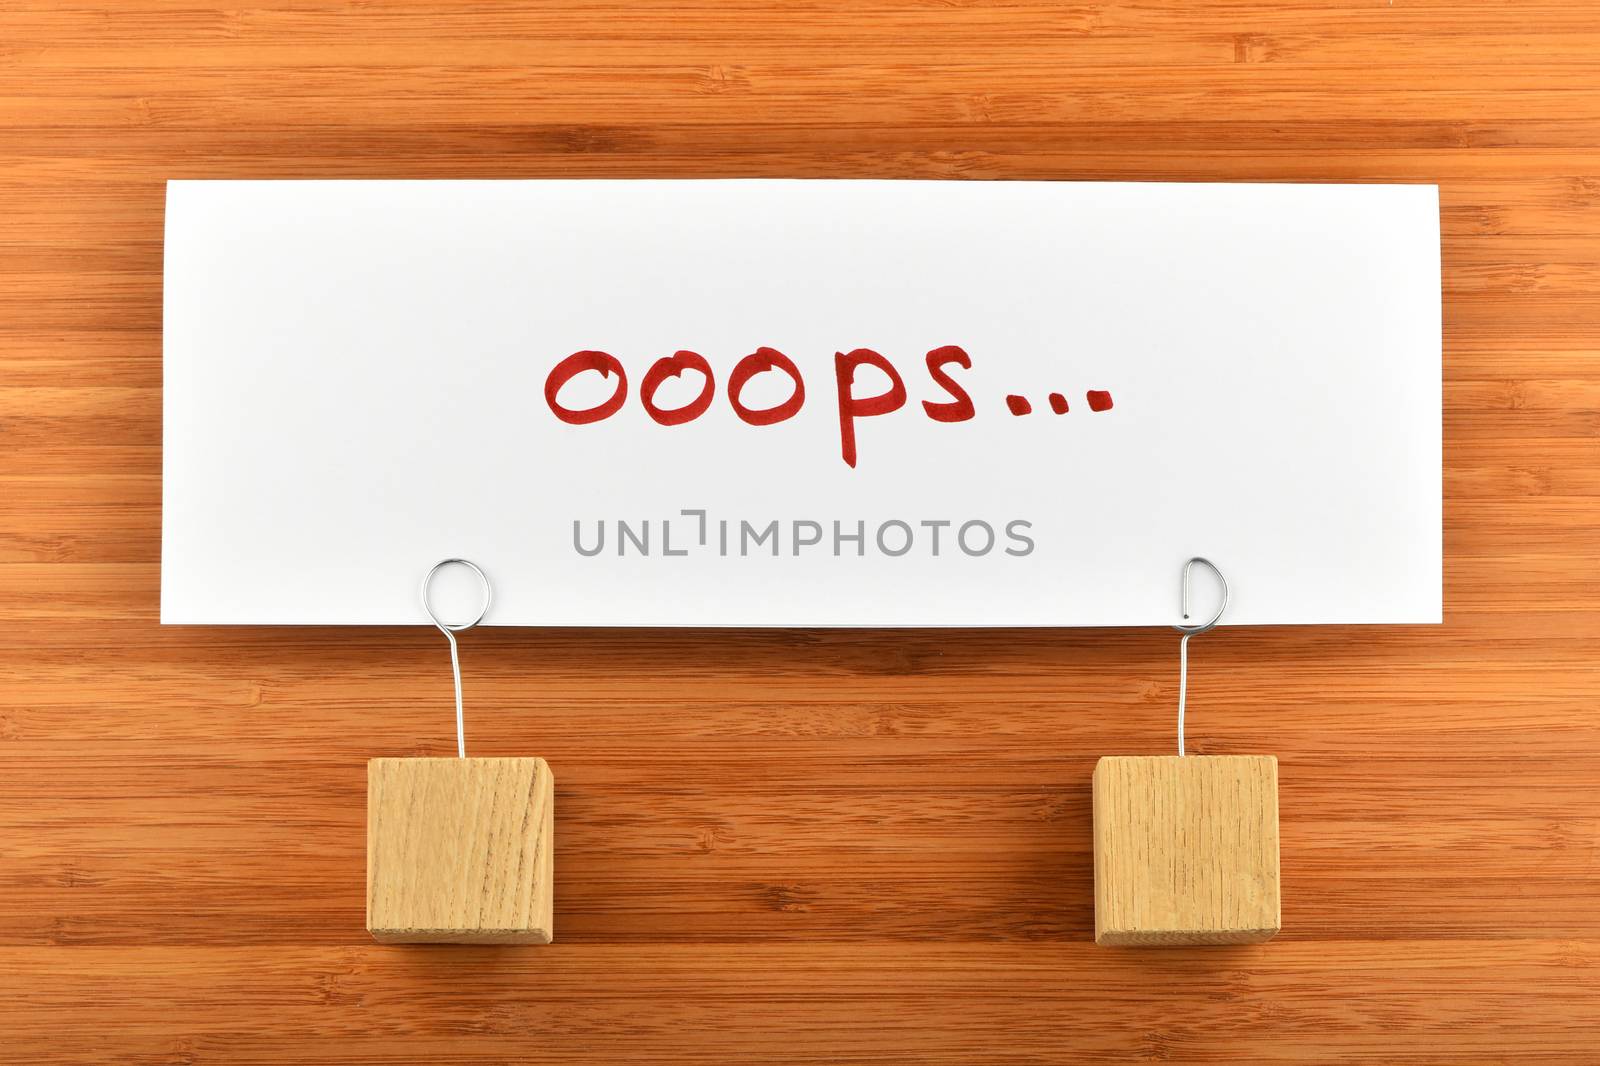 Oops, looks we have problem, one big white paper note with two wooden holders on wooden bamboo background for presentation